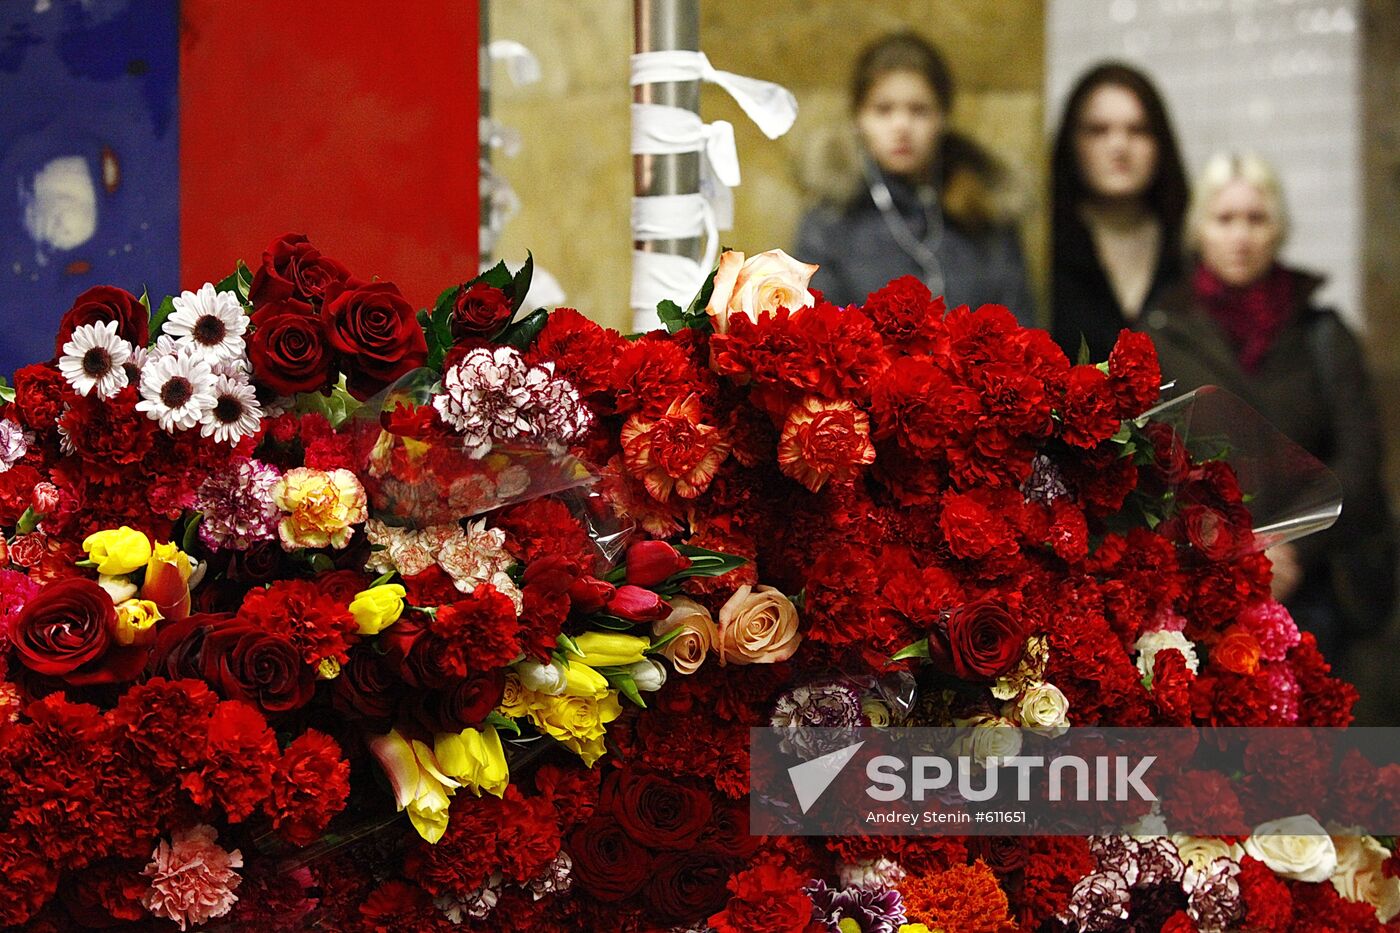 Day of mourning for terror victims in Moscow